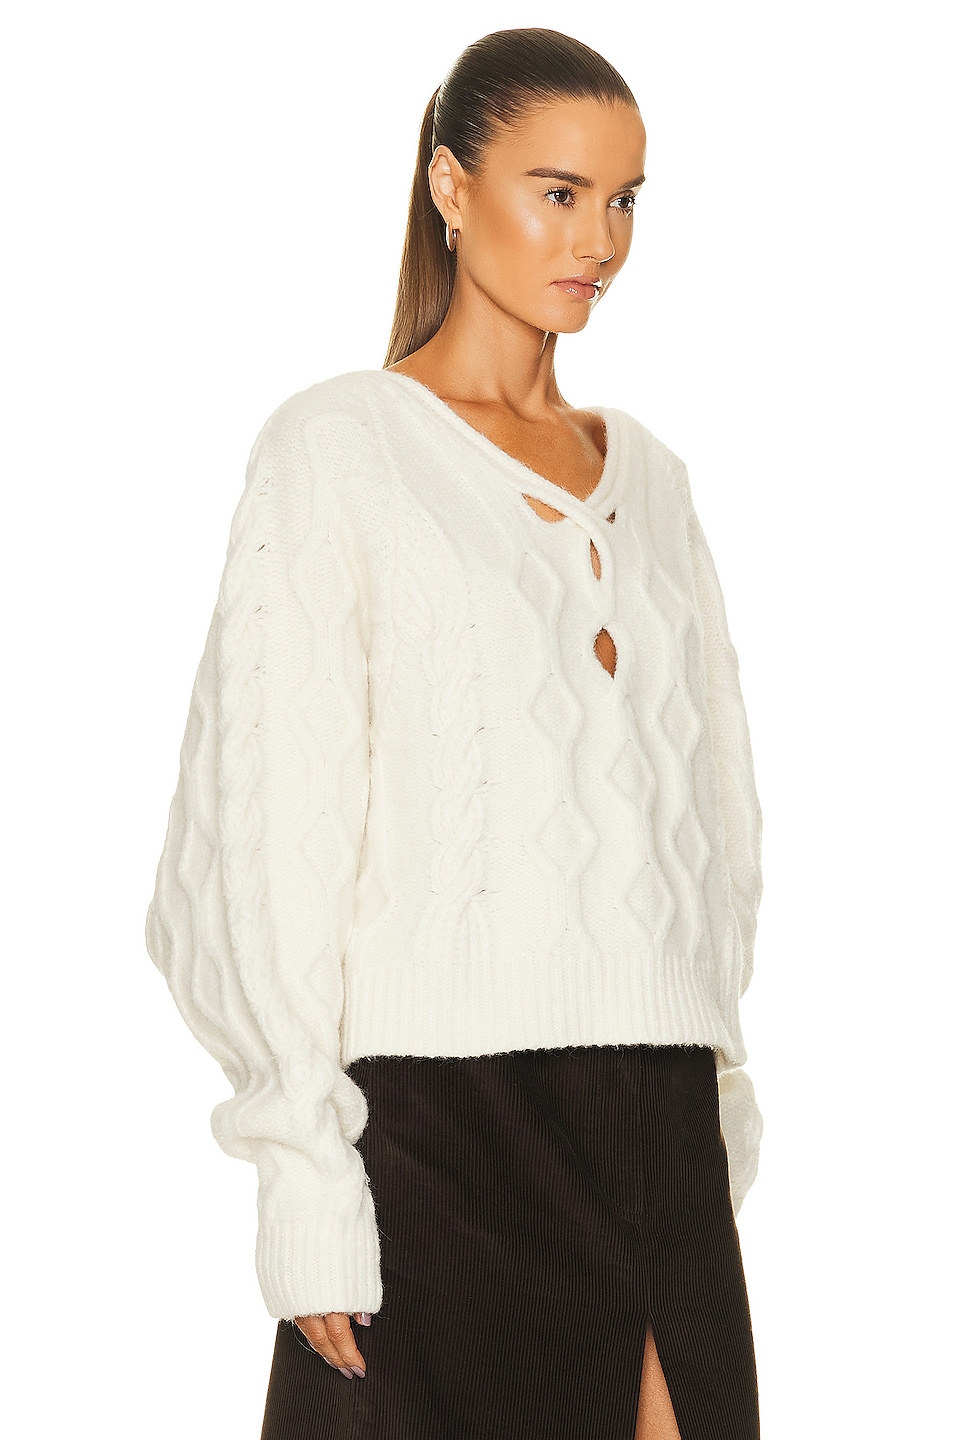 Aisling Camps Iceberg Cable Sweater in Ivory | FWRD